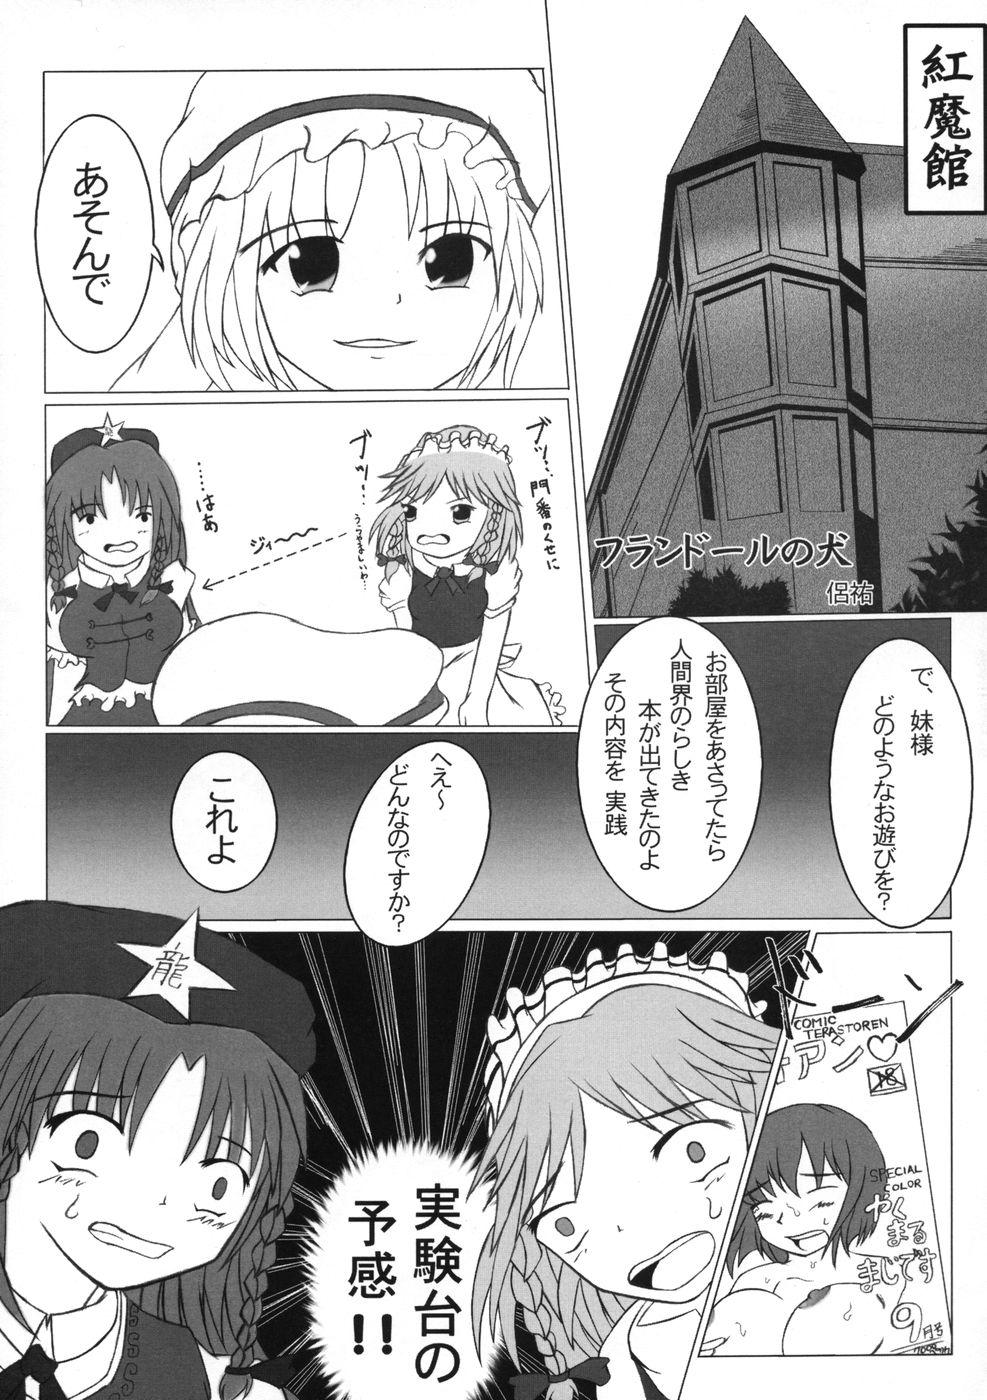 Flagra 業創りし風 - Touhou project Lolicon - Page 5